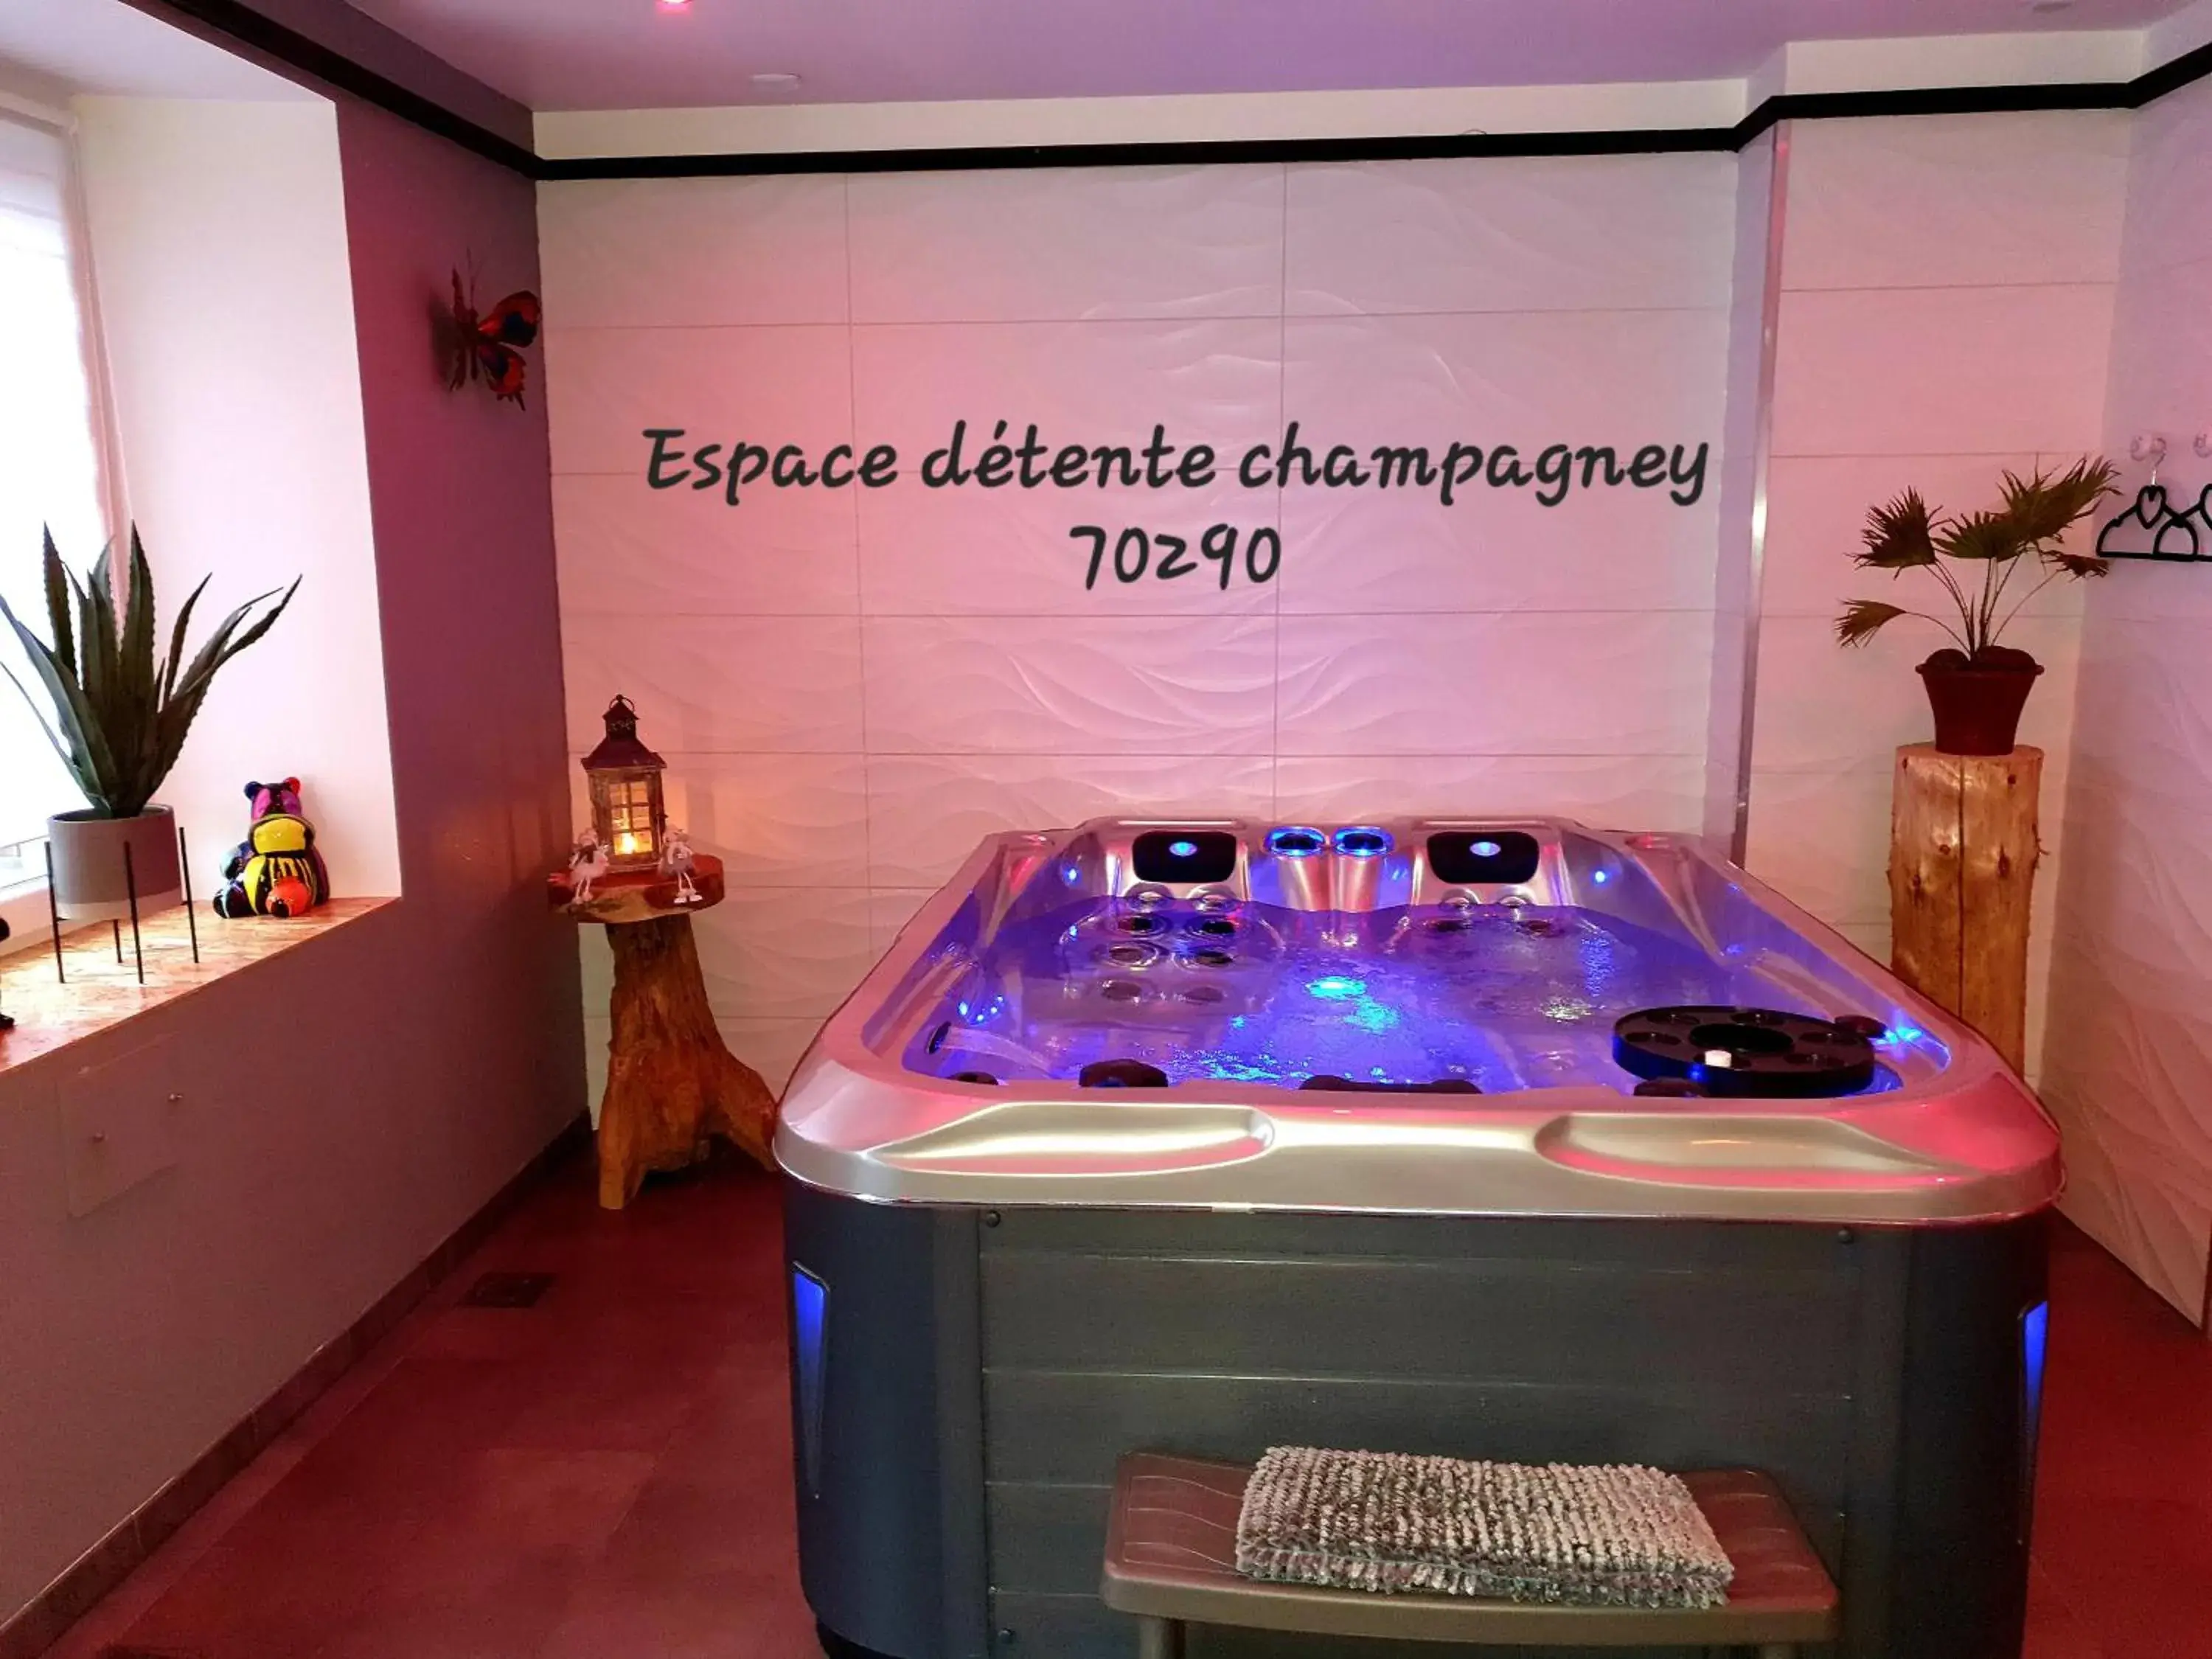 Spa and wellness centre/facilities in espace detente champagney